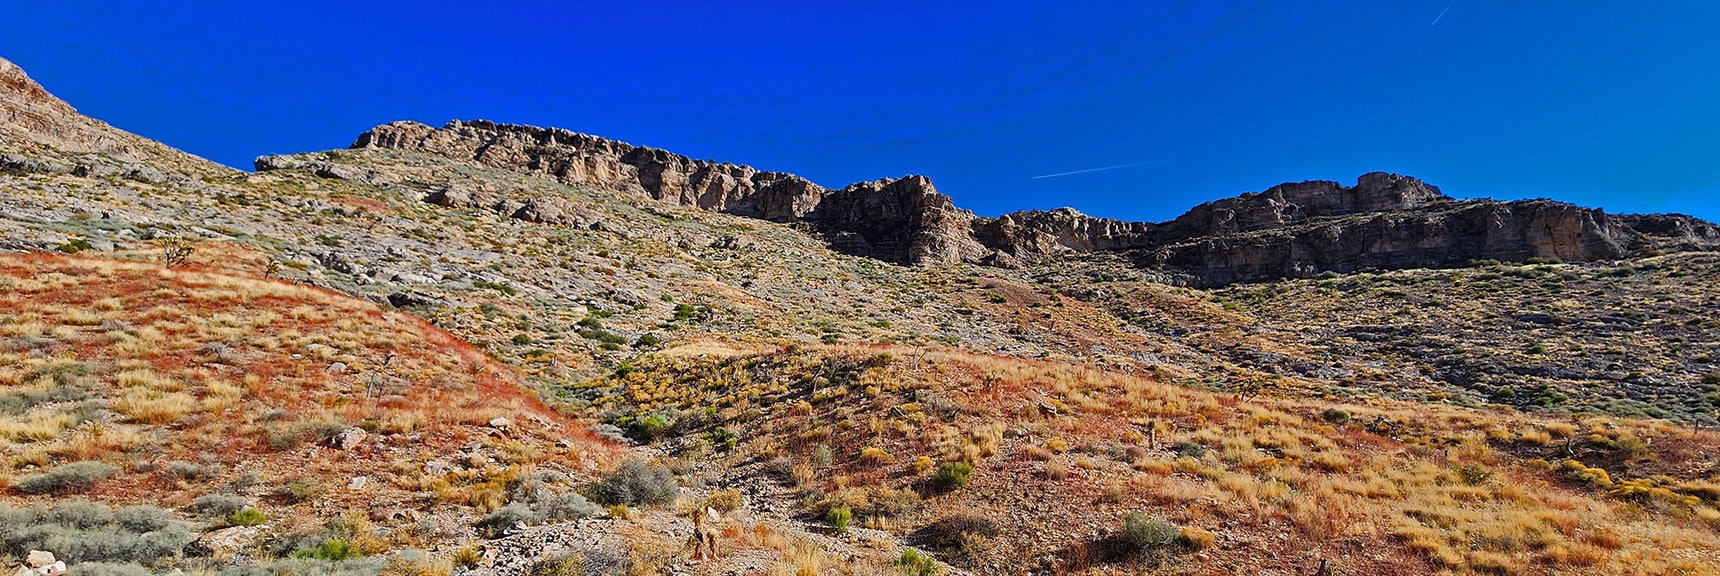 More of the Bluff's Western Summit Line in This Canyon. | Landmark Bluff | Lovell Canyon, Nevada